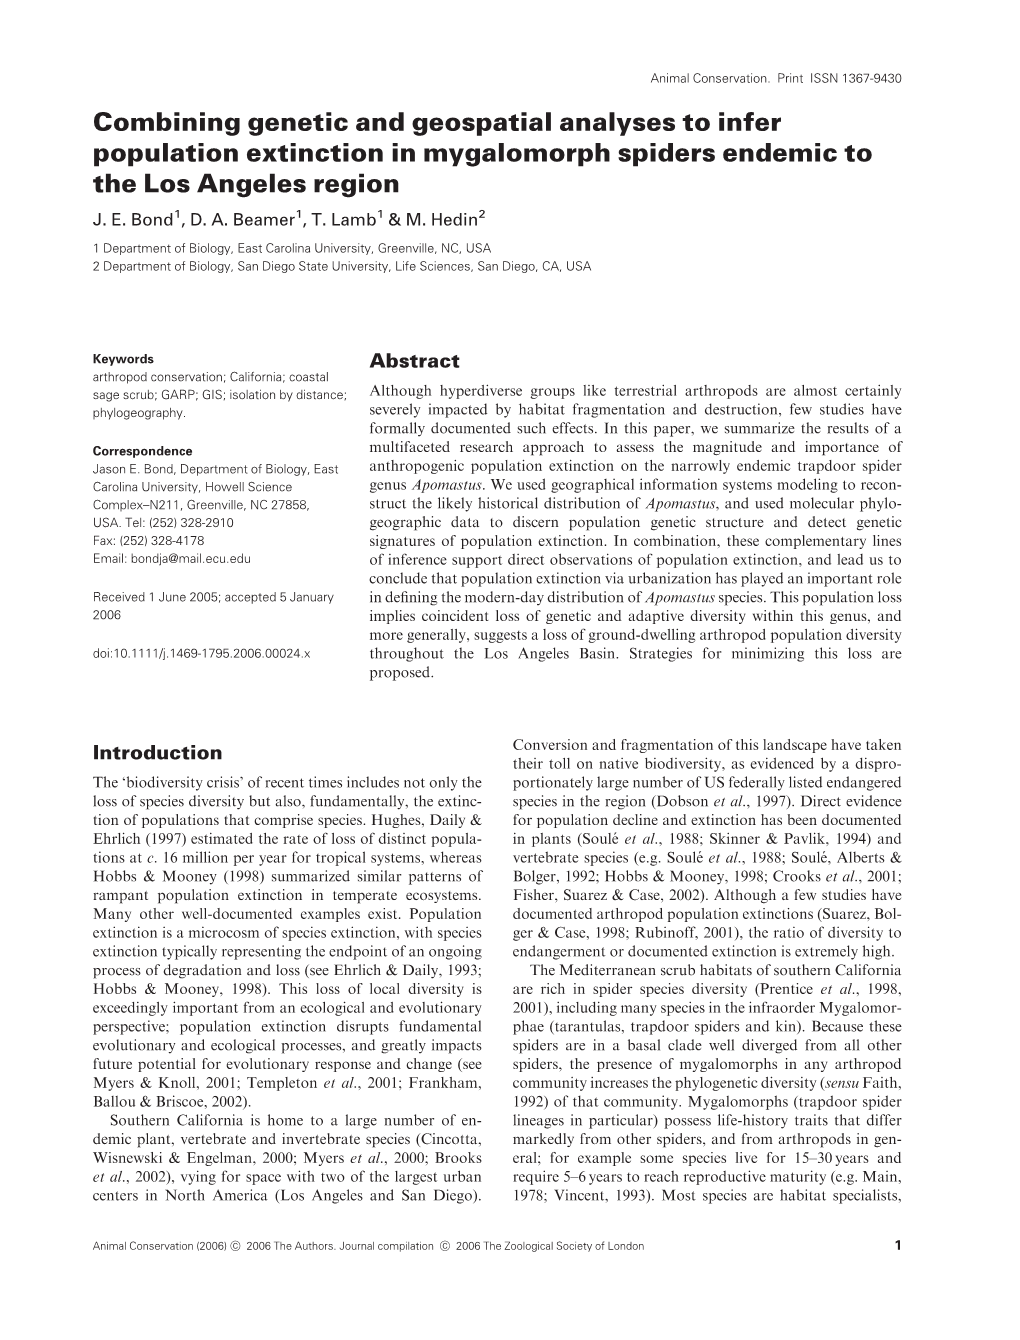 Combining Genetic and Geospatial Analyses to Infer Population Extinction in Mygalomorph Spiders Endemic to the Los Angeles Region J